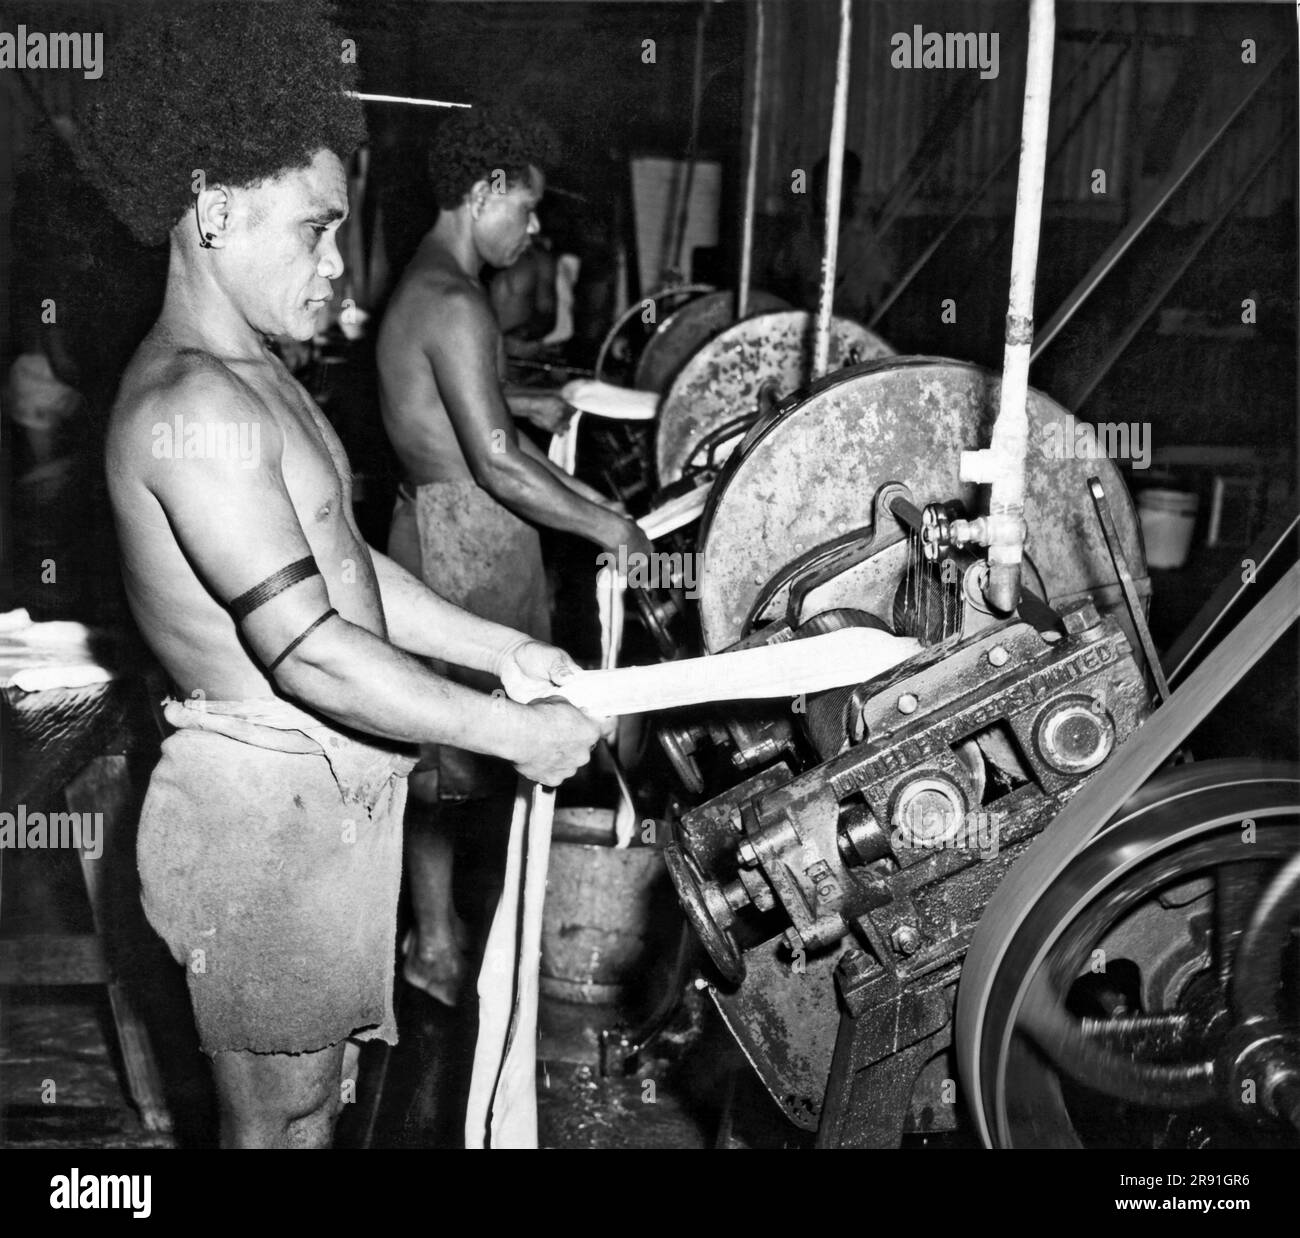 New Guinea:  January 21, 1944. A native Papuan man feeds slabs of rubber through the cutting and rolling machine. The rubber trees were originally  brought in from Malaysia. Stock Photo